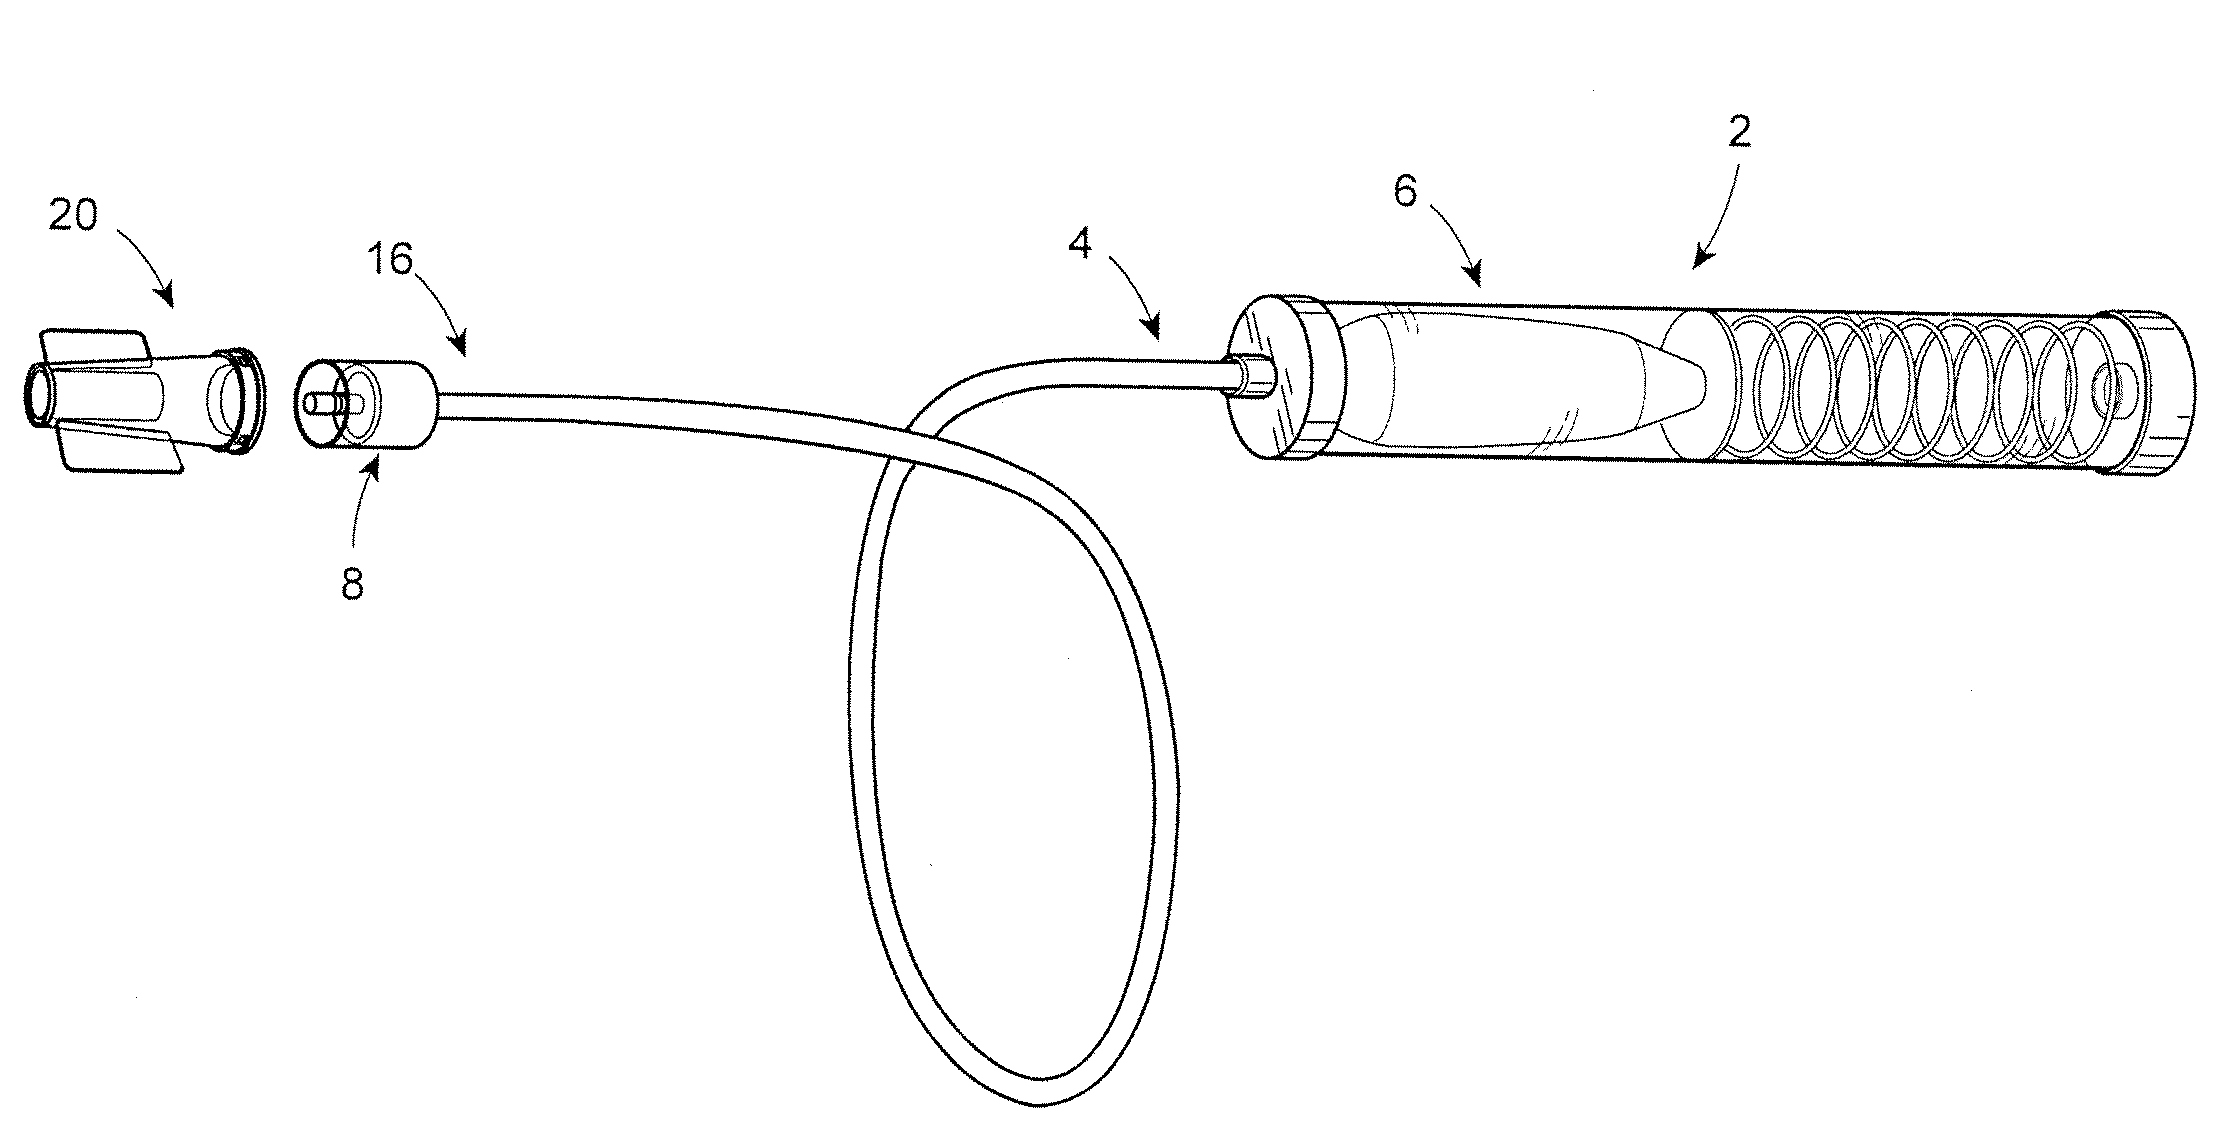 Device to Indicate Priming of an Infusion Line